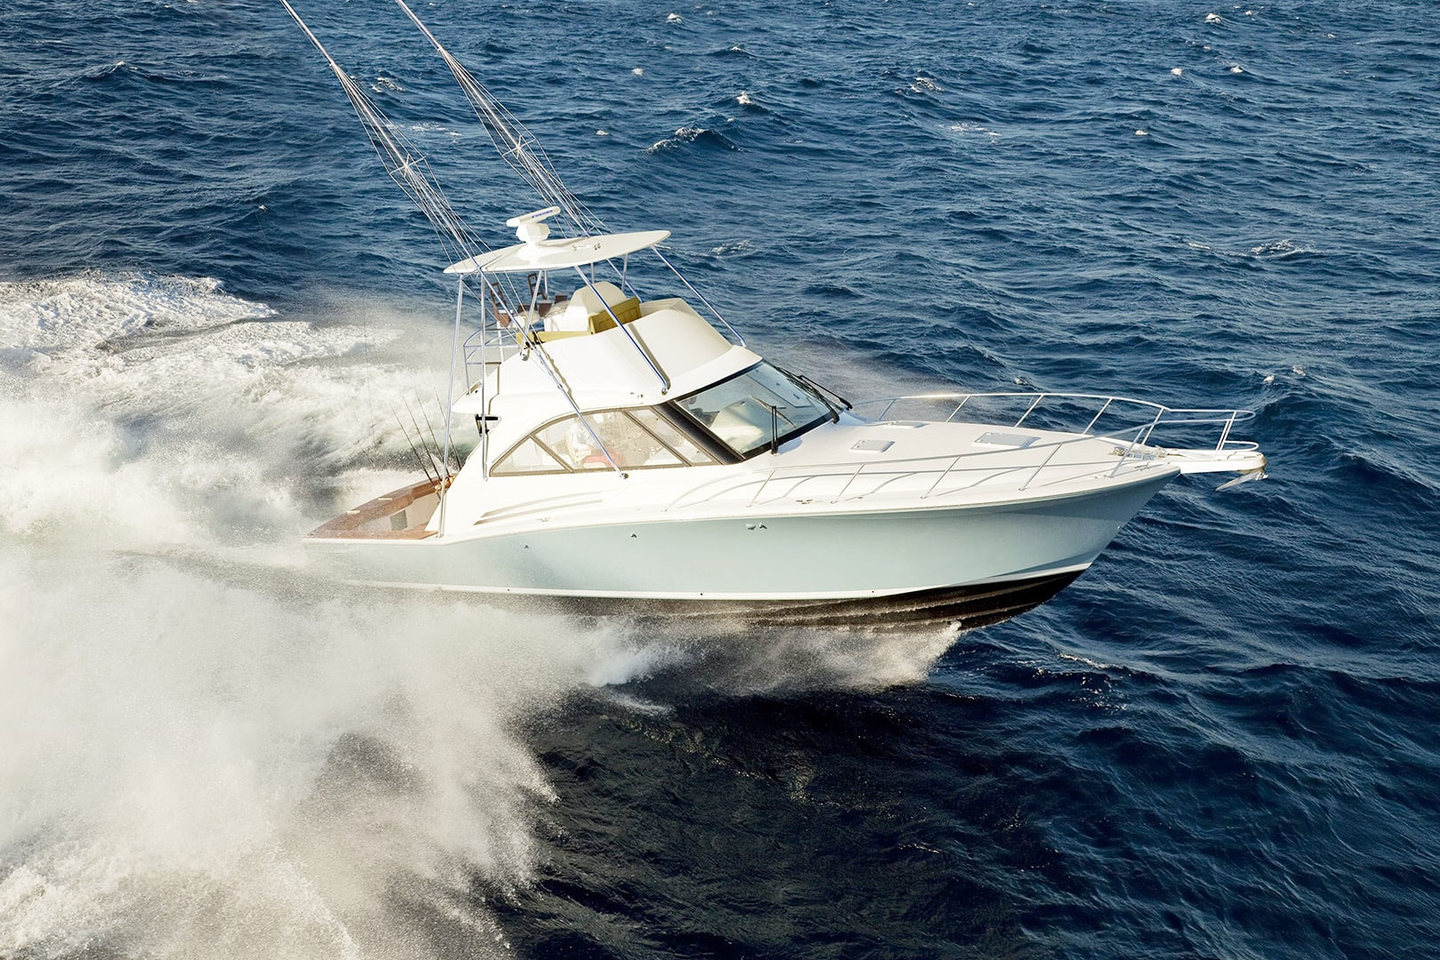 360 VR Virtual Tours of the Hatteras GT45X